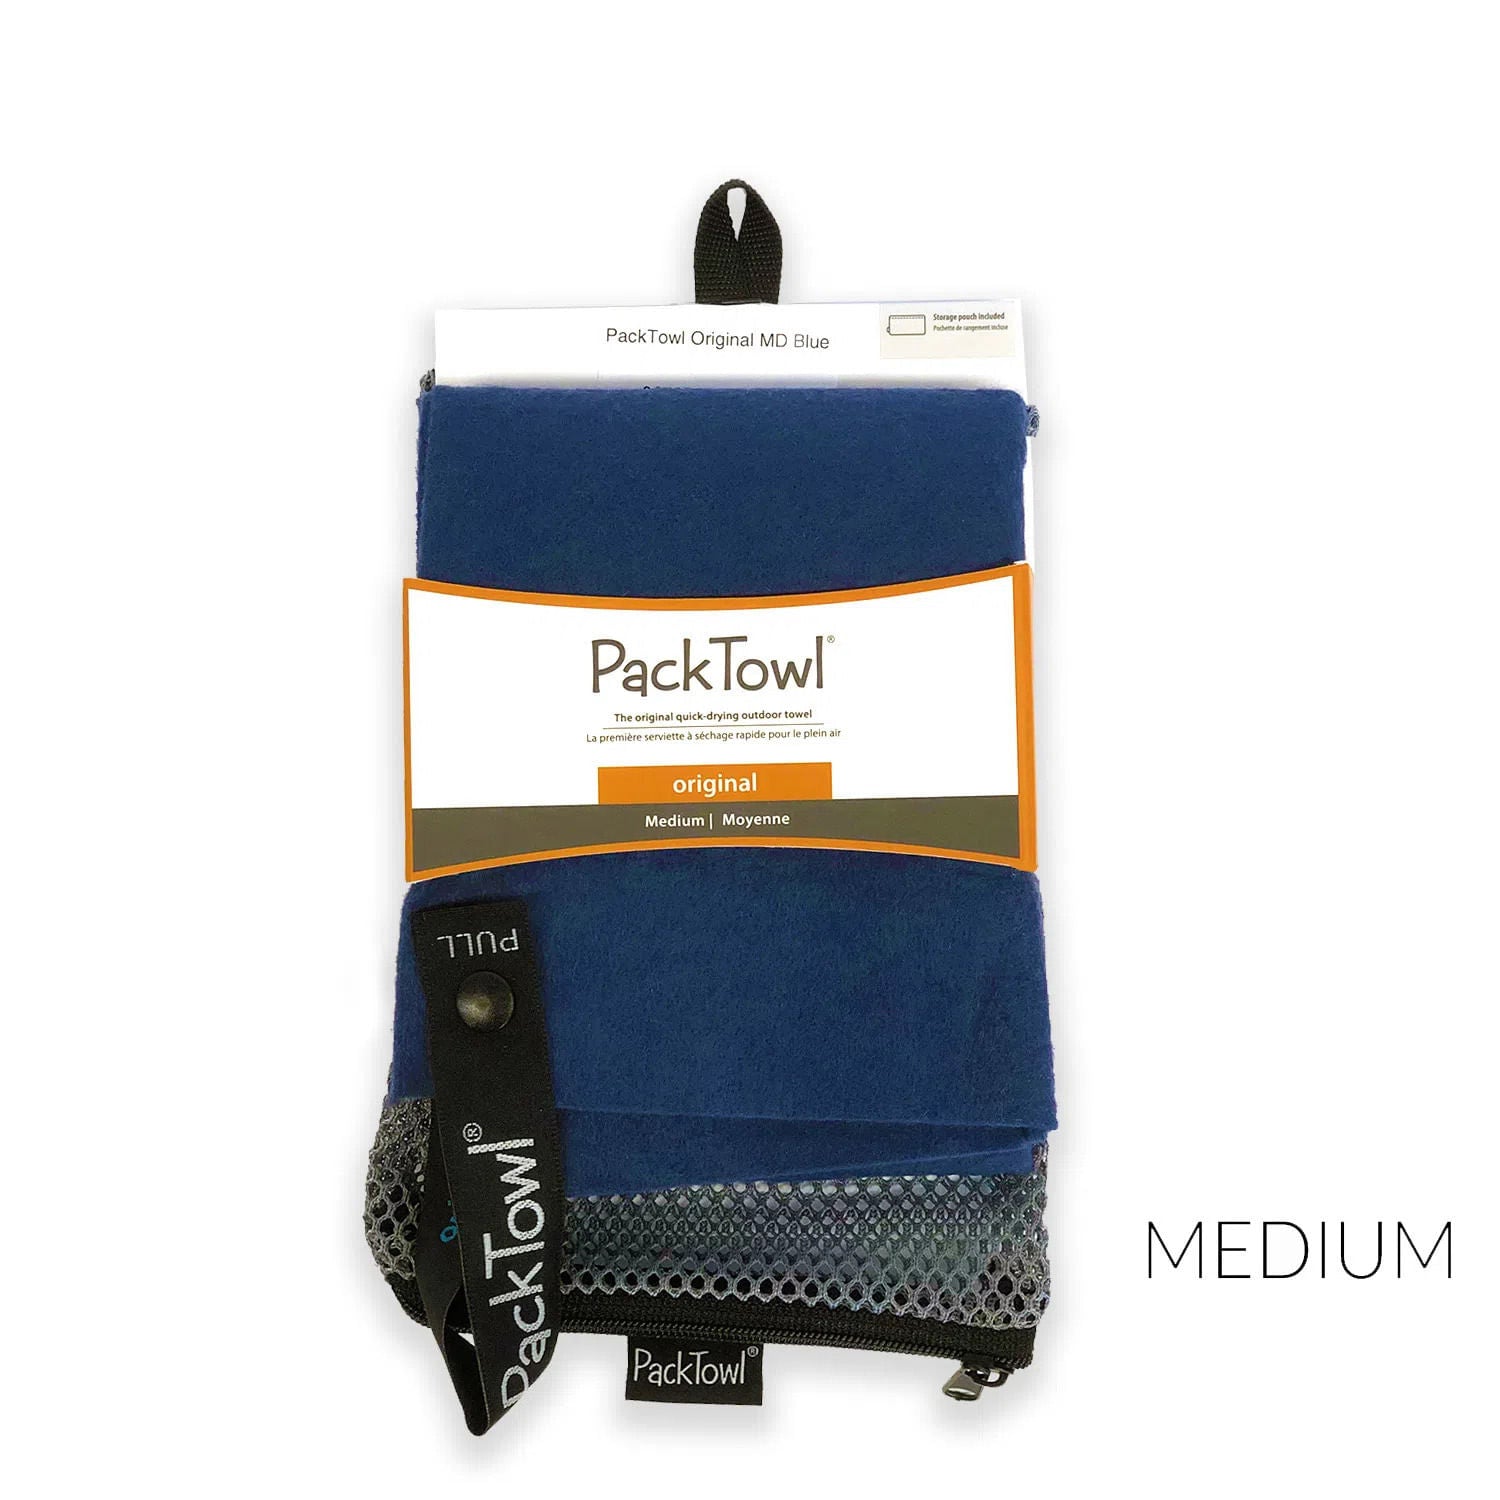 PackTowl Travel Towels